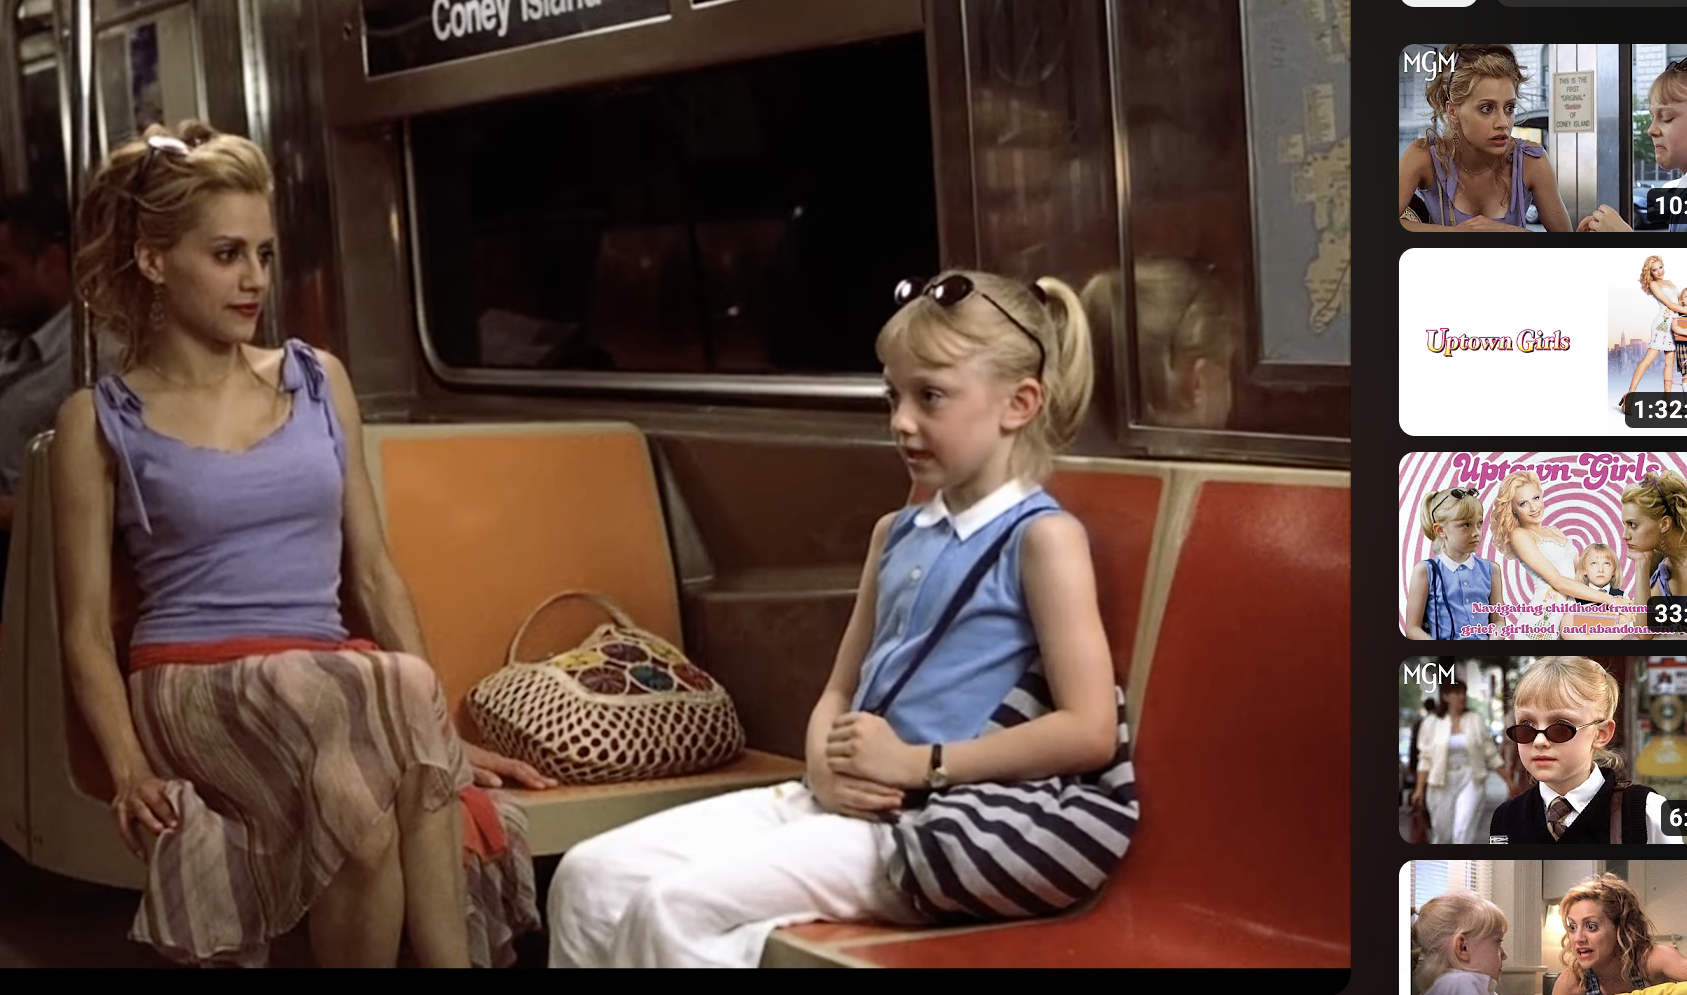 Brittany Murphy and Dakota Fanning as Molly and Ray in &quot;Uptown Girls&quot; are on the subway